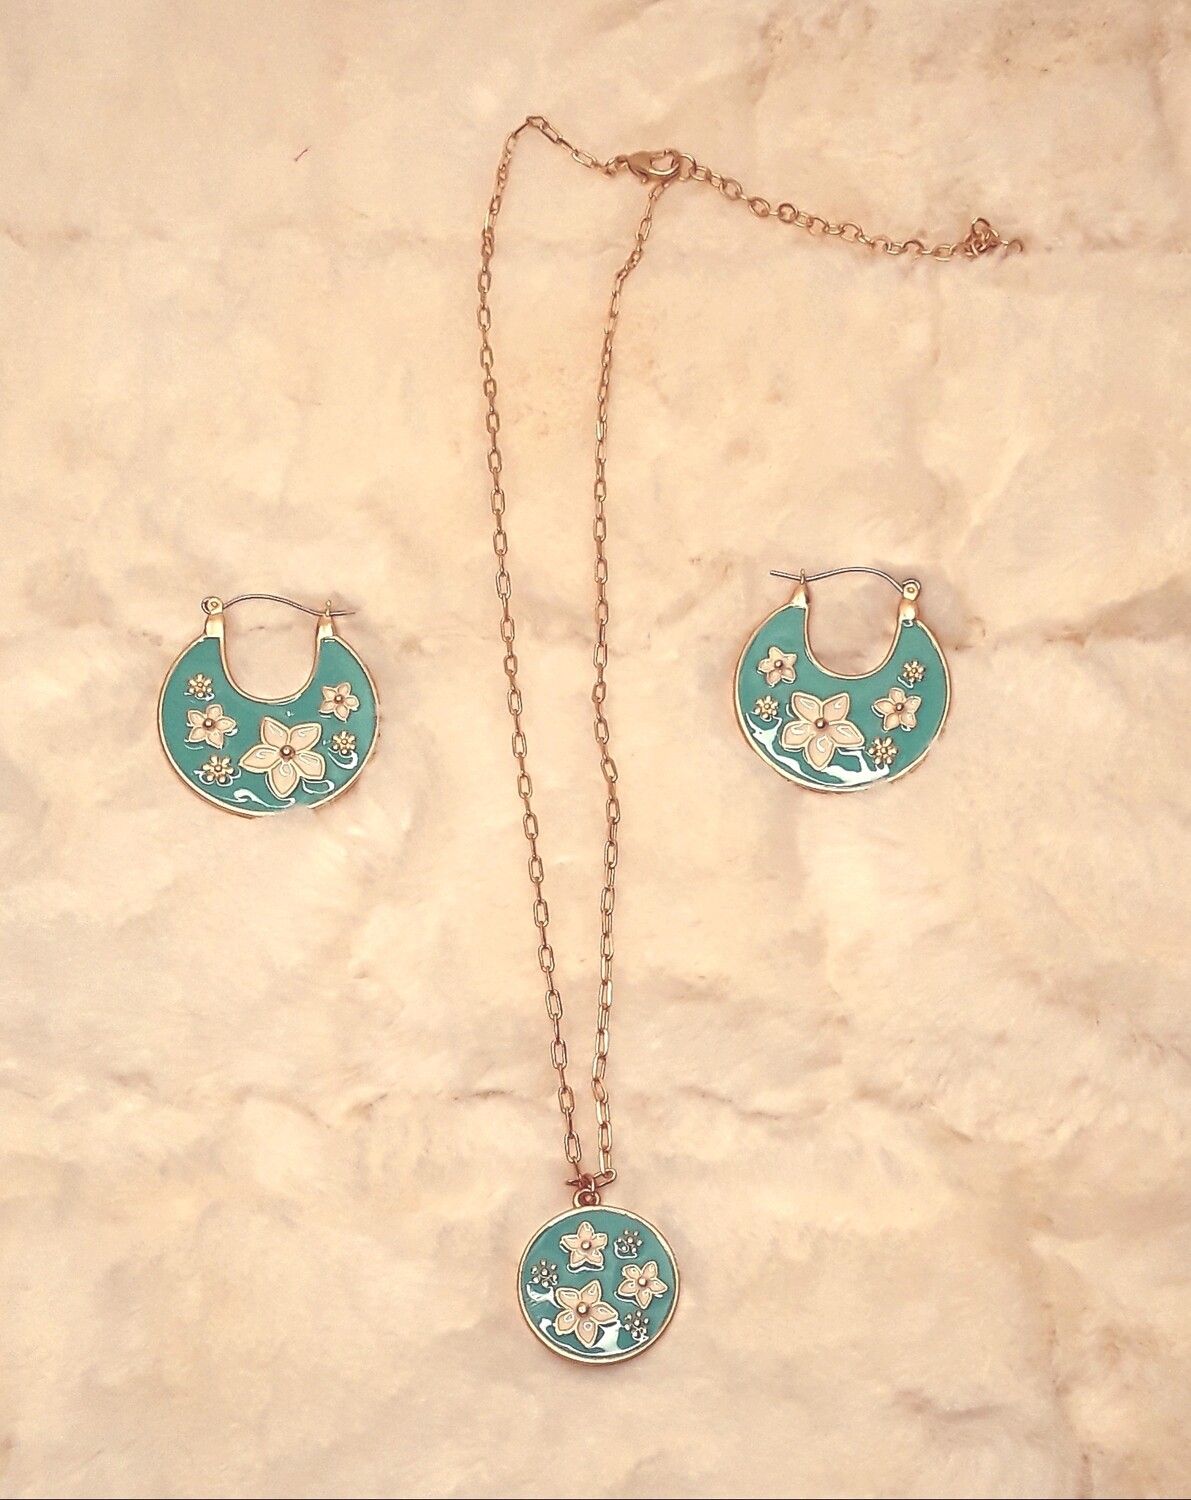 Turquoise and White Flower Necklace 